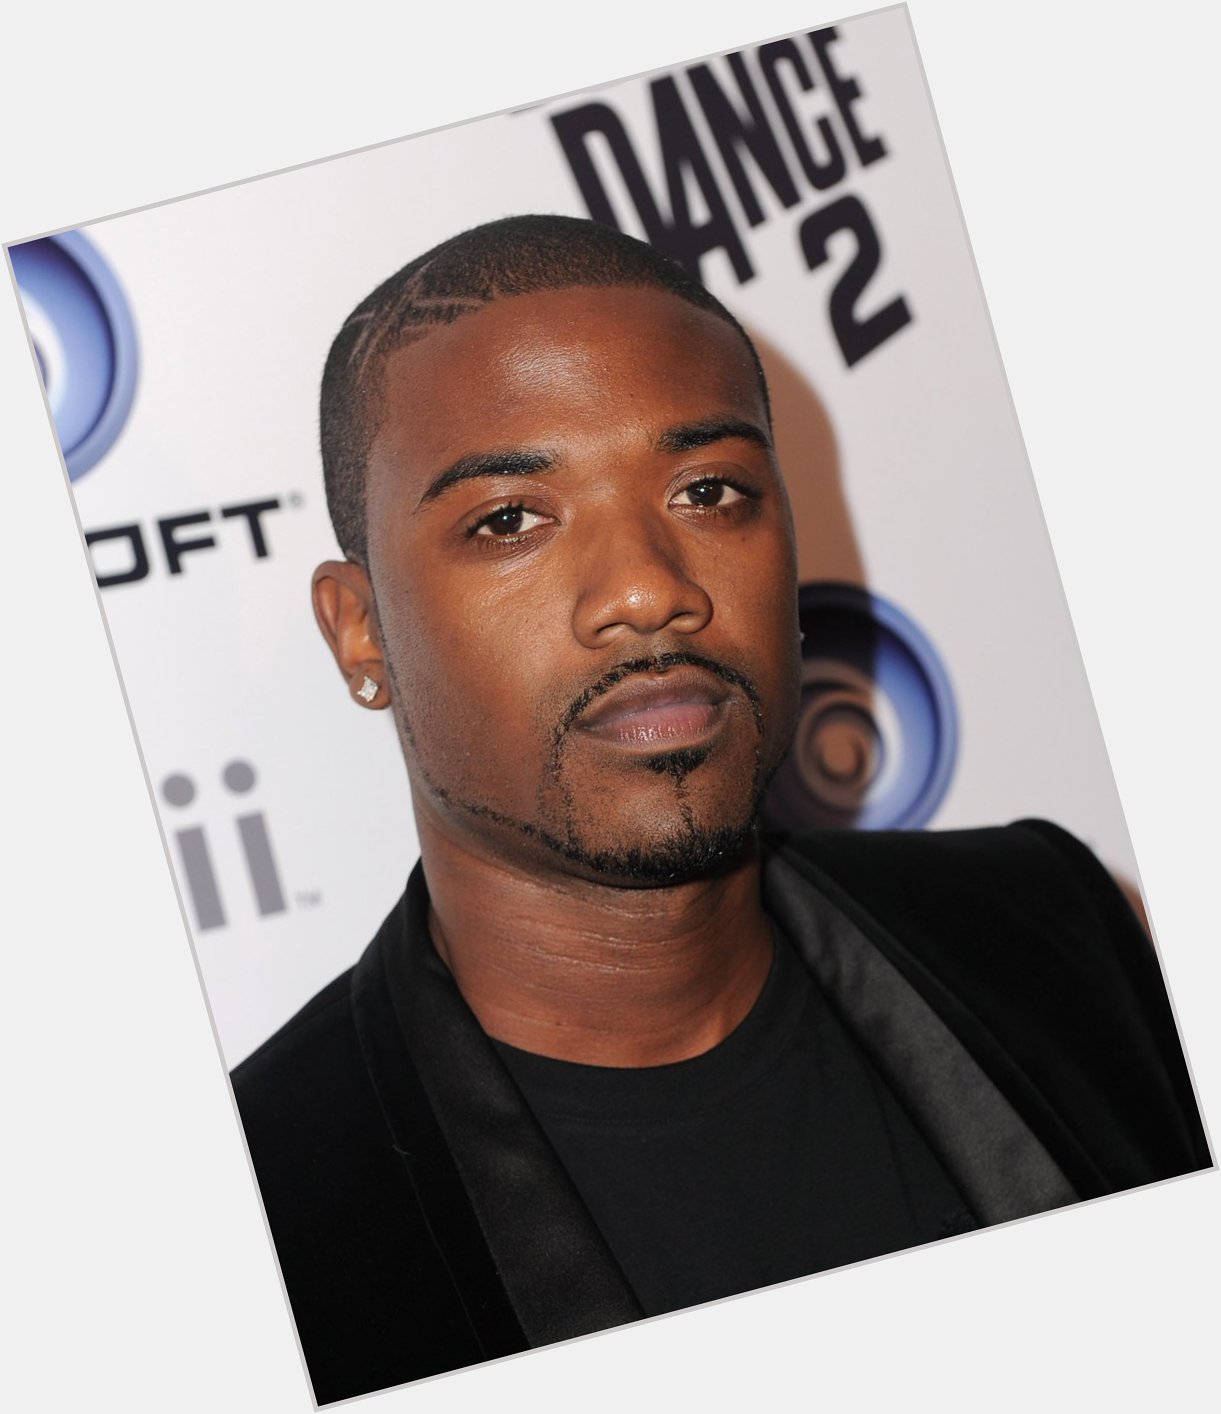 Happy 41st Birthday to the legend, Ray J! Everything we love is directly related to Ray J - Vince Staples 